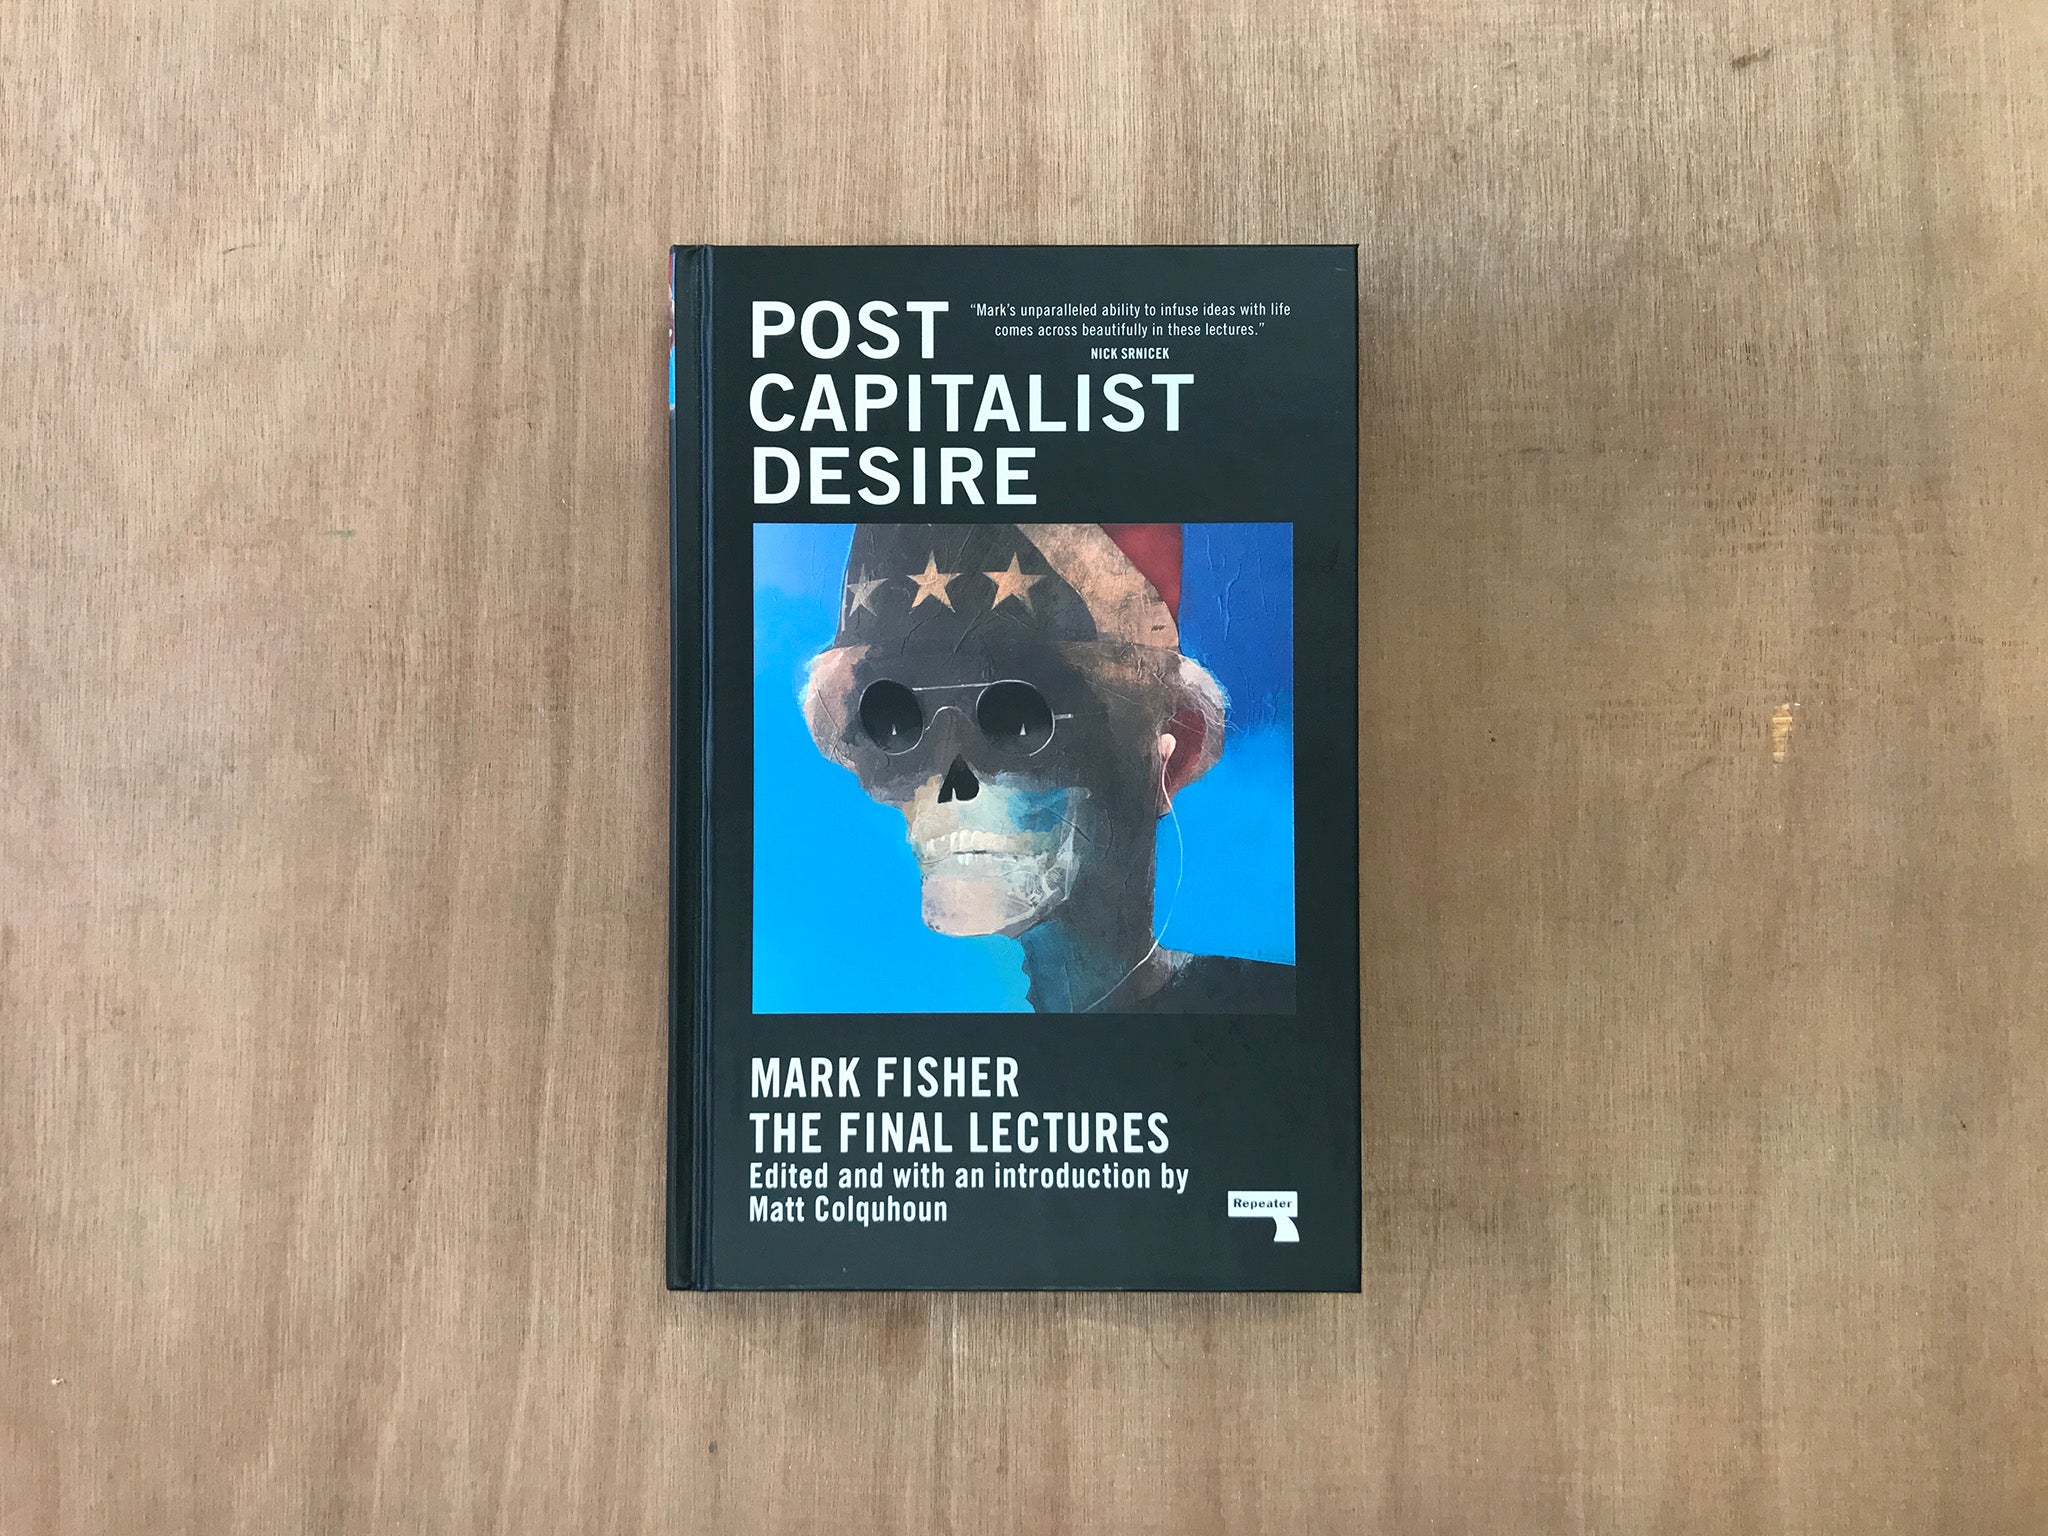 POST CAPITALIST DESIRE by Mark Fisher